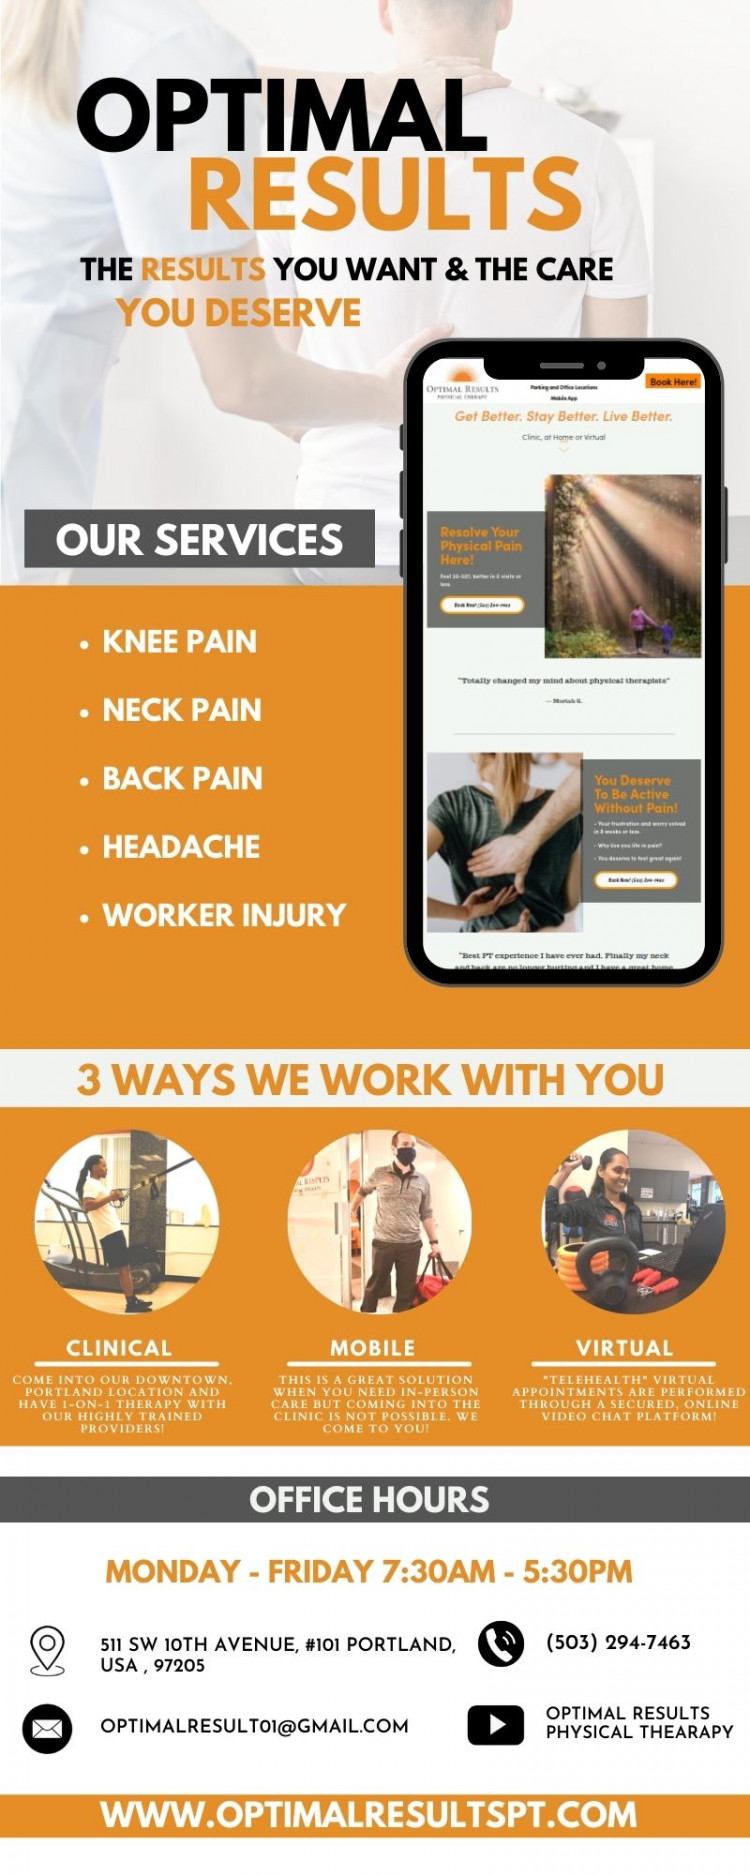 At Optimal Results, we have top rated workers comp physical therapy in Portland. Our promise is to help you in resolving the problem in one take.
https://optimalresultspt.com/